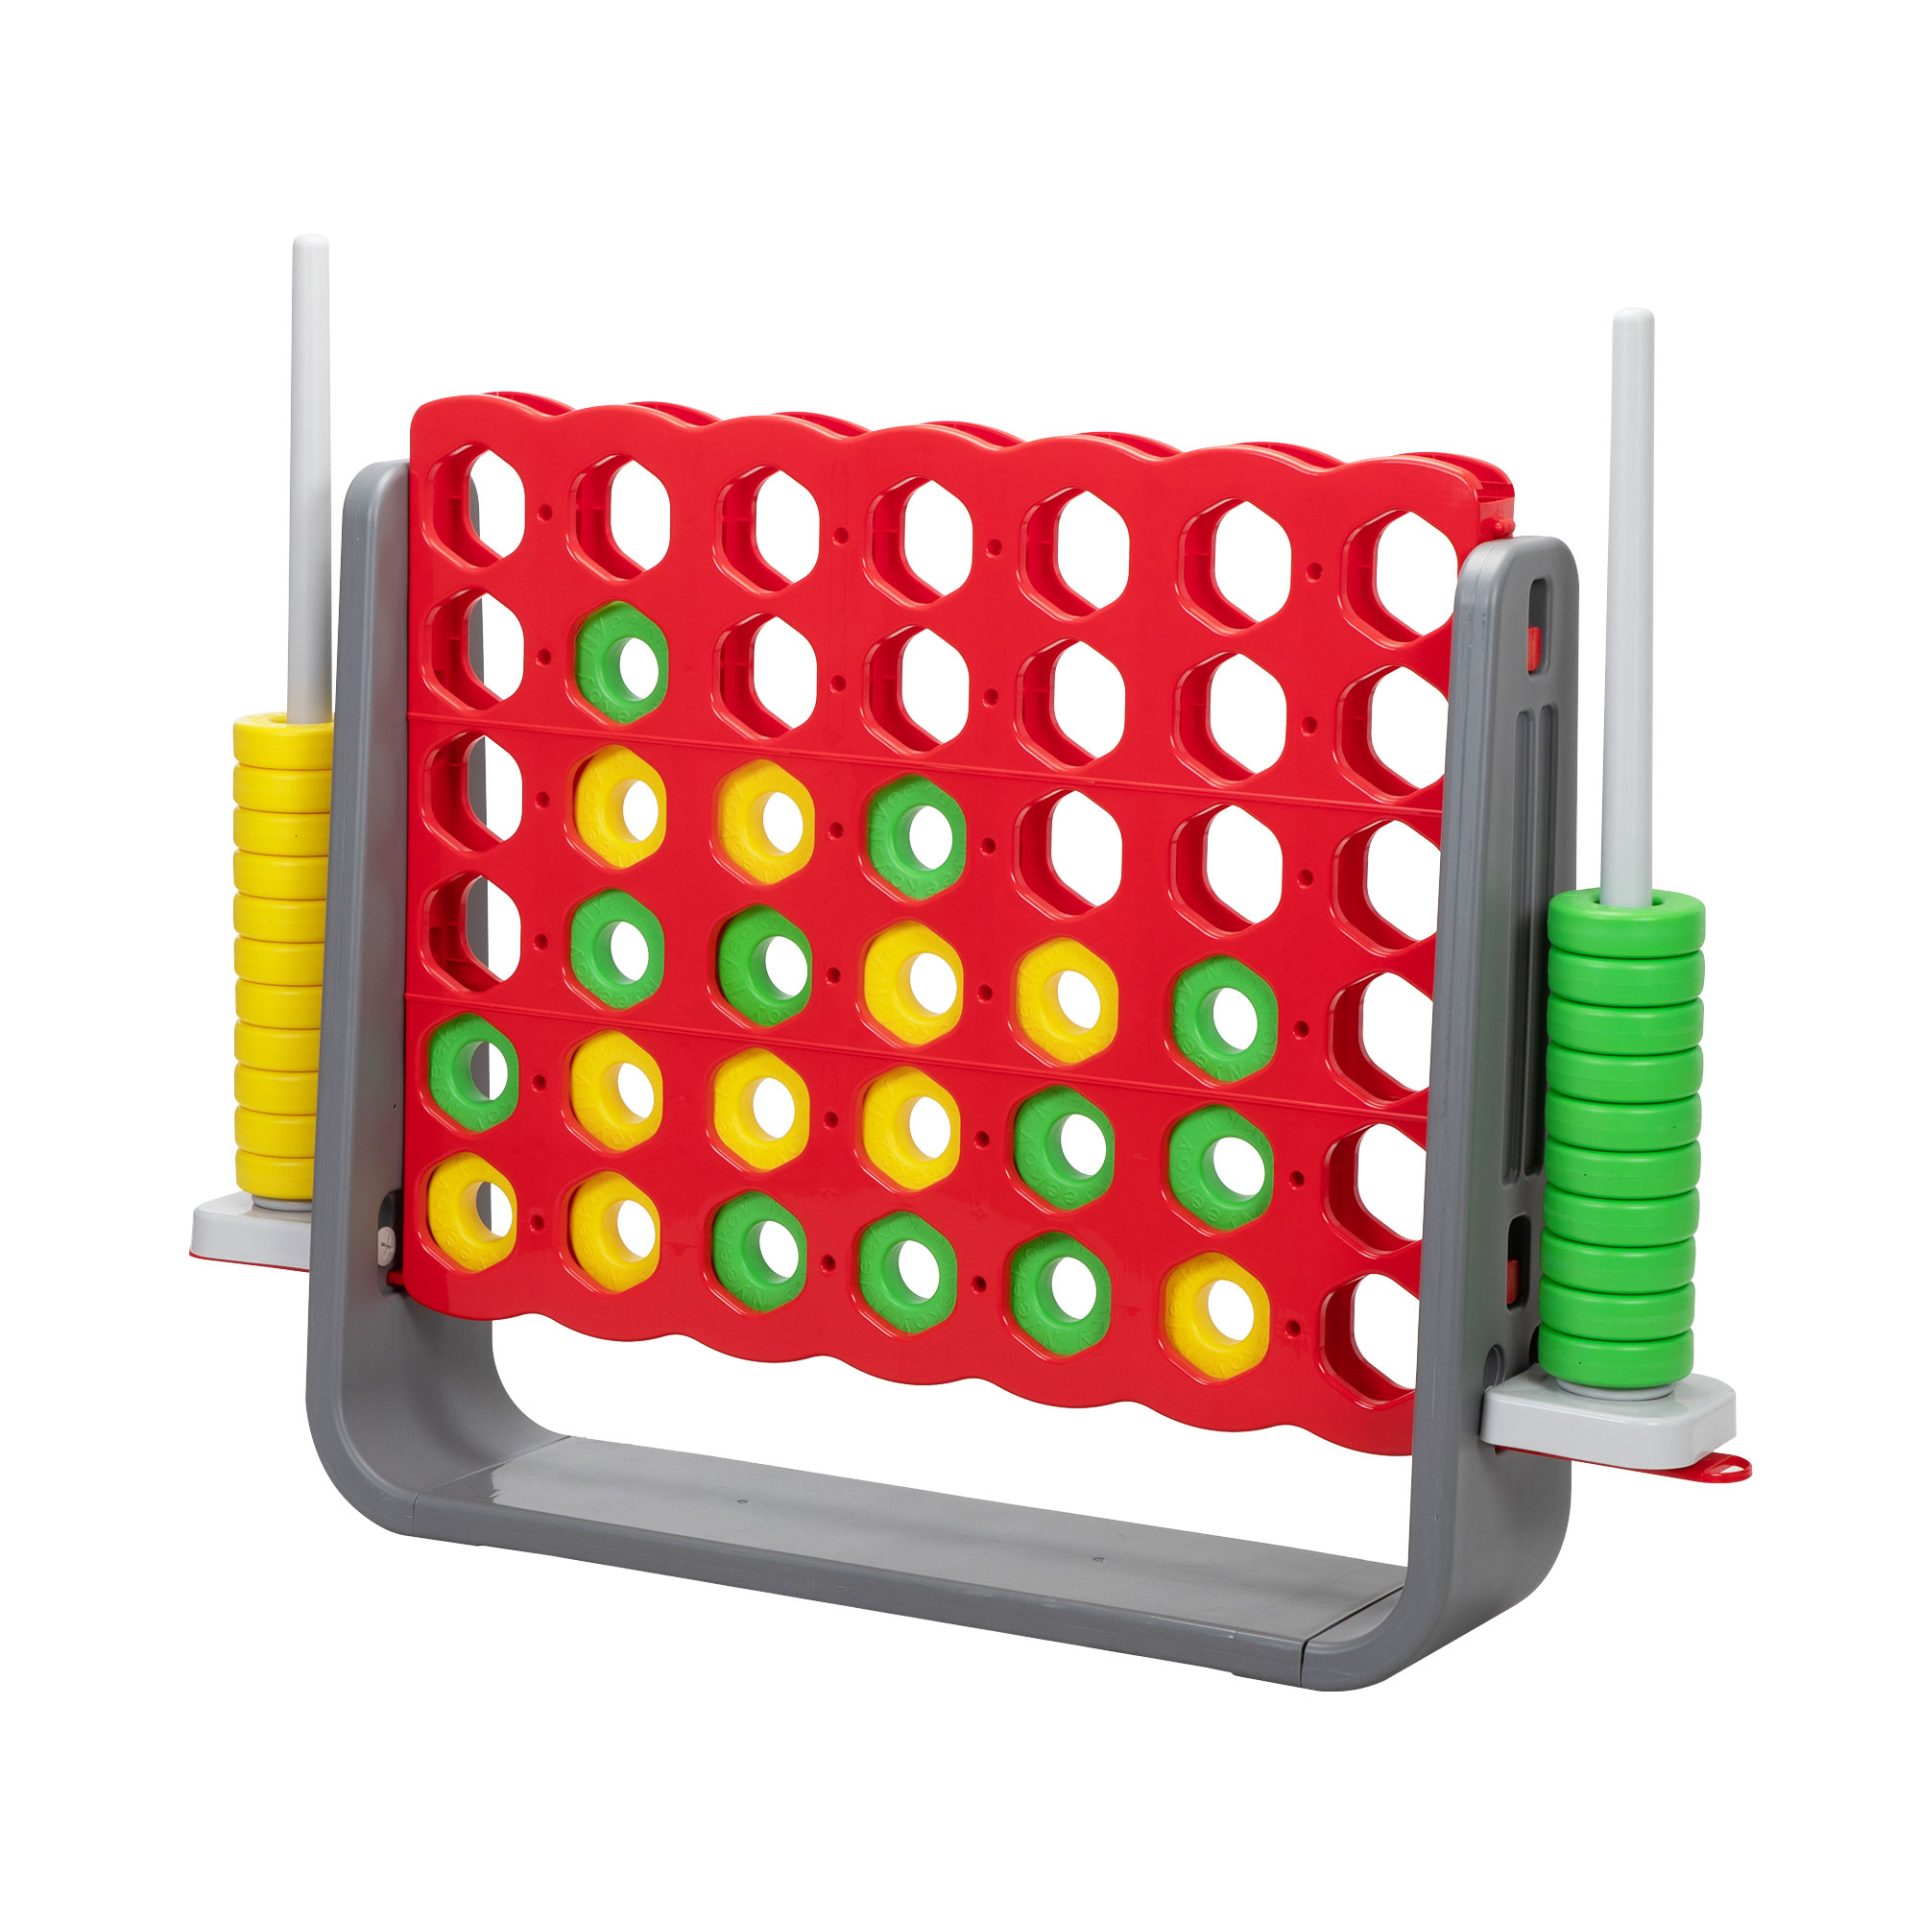 Nyeekoy UniHex Jumbo 4-to-Score Giant Game Set for Kids and Adults, Red and Grey TH17W1000 1 scaled